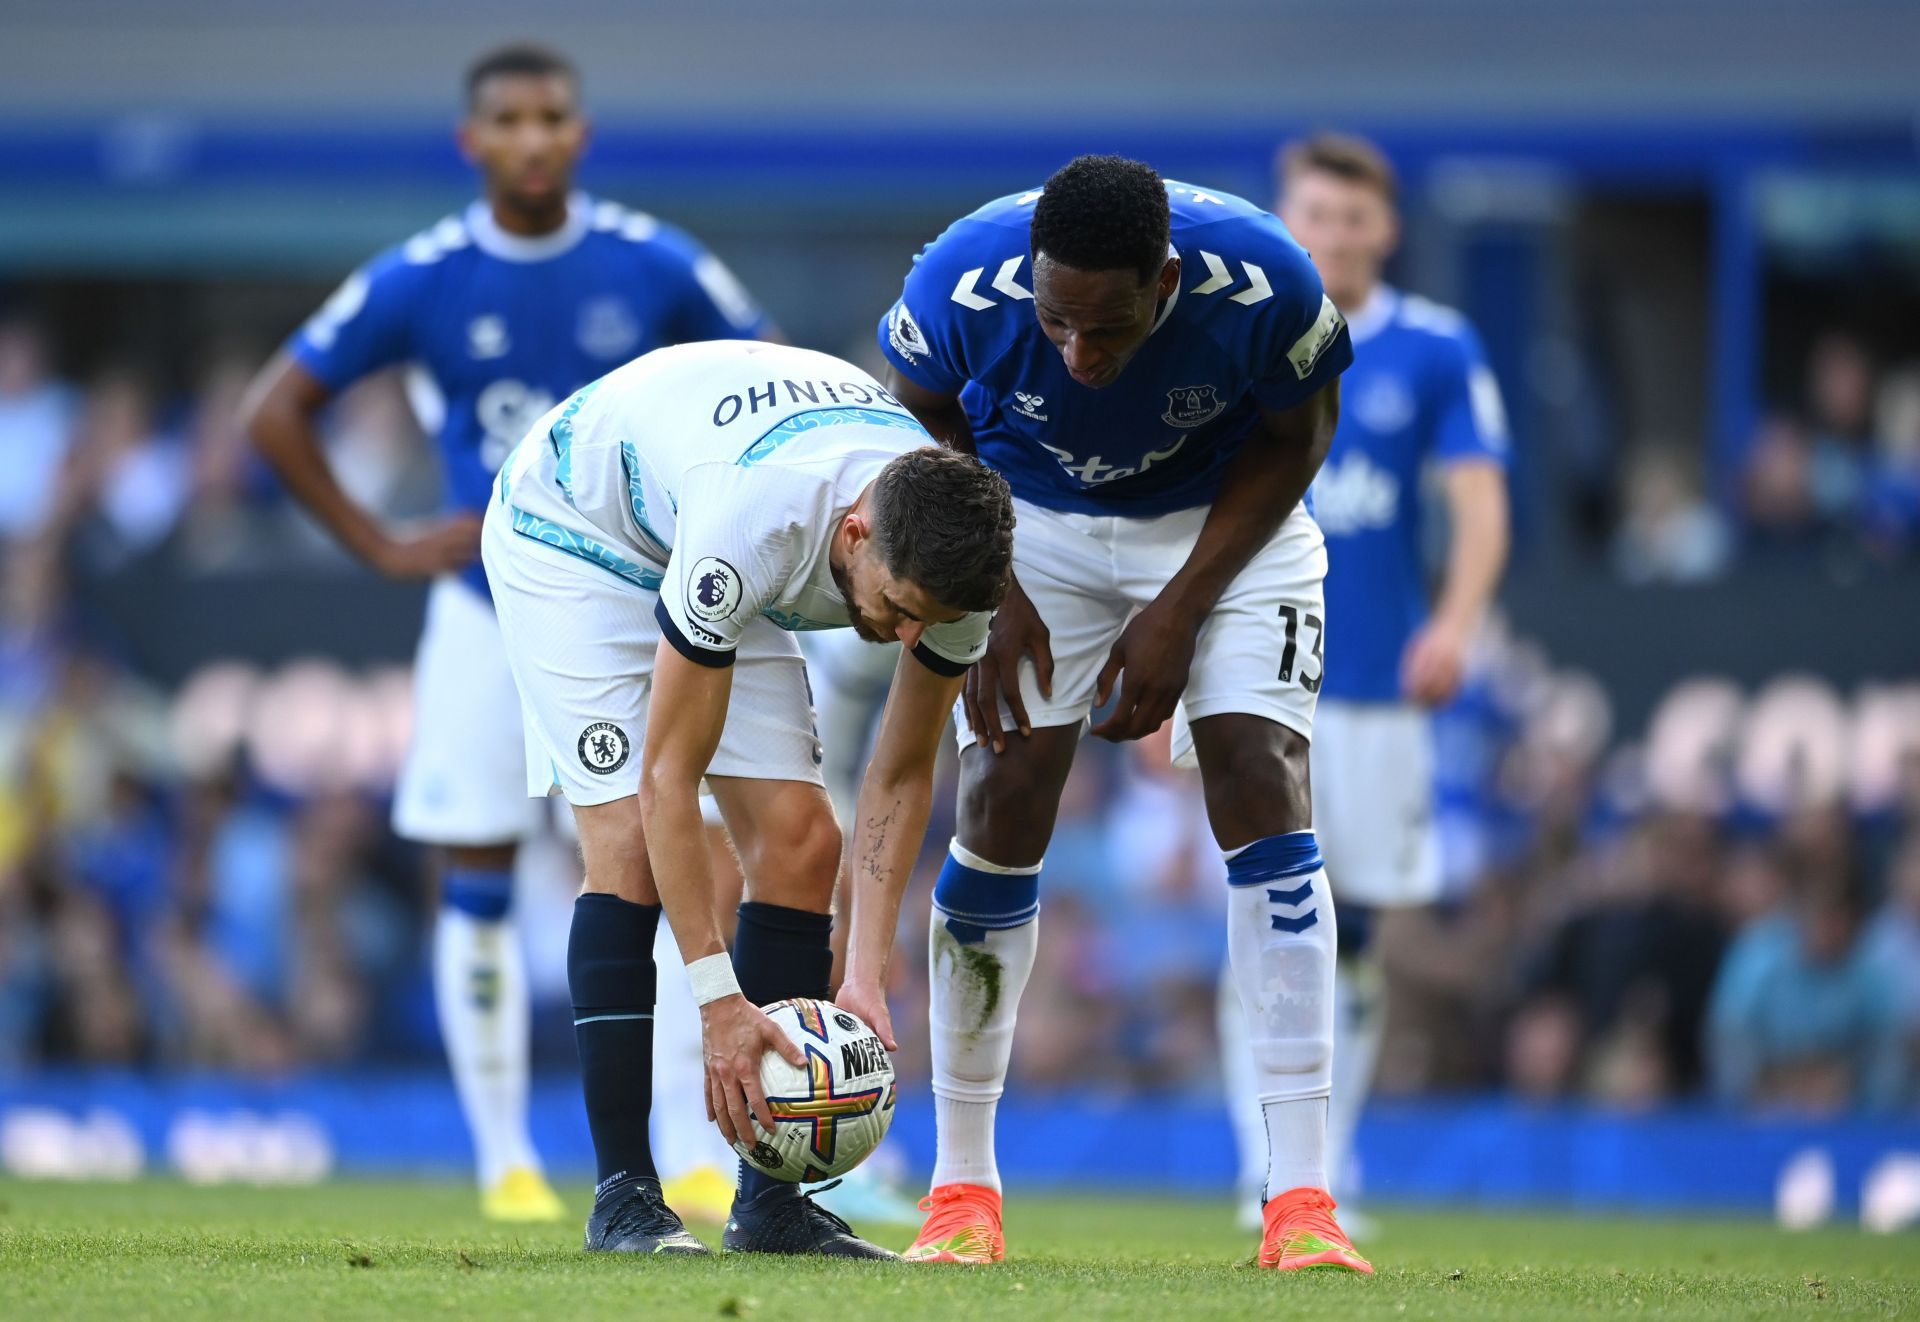 Jorginho scored the match-winning goal to condemn Everton to their first opening day loss since 2012